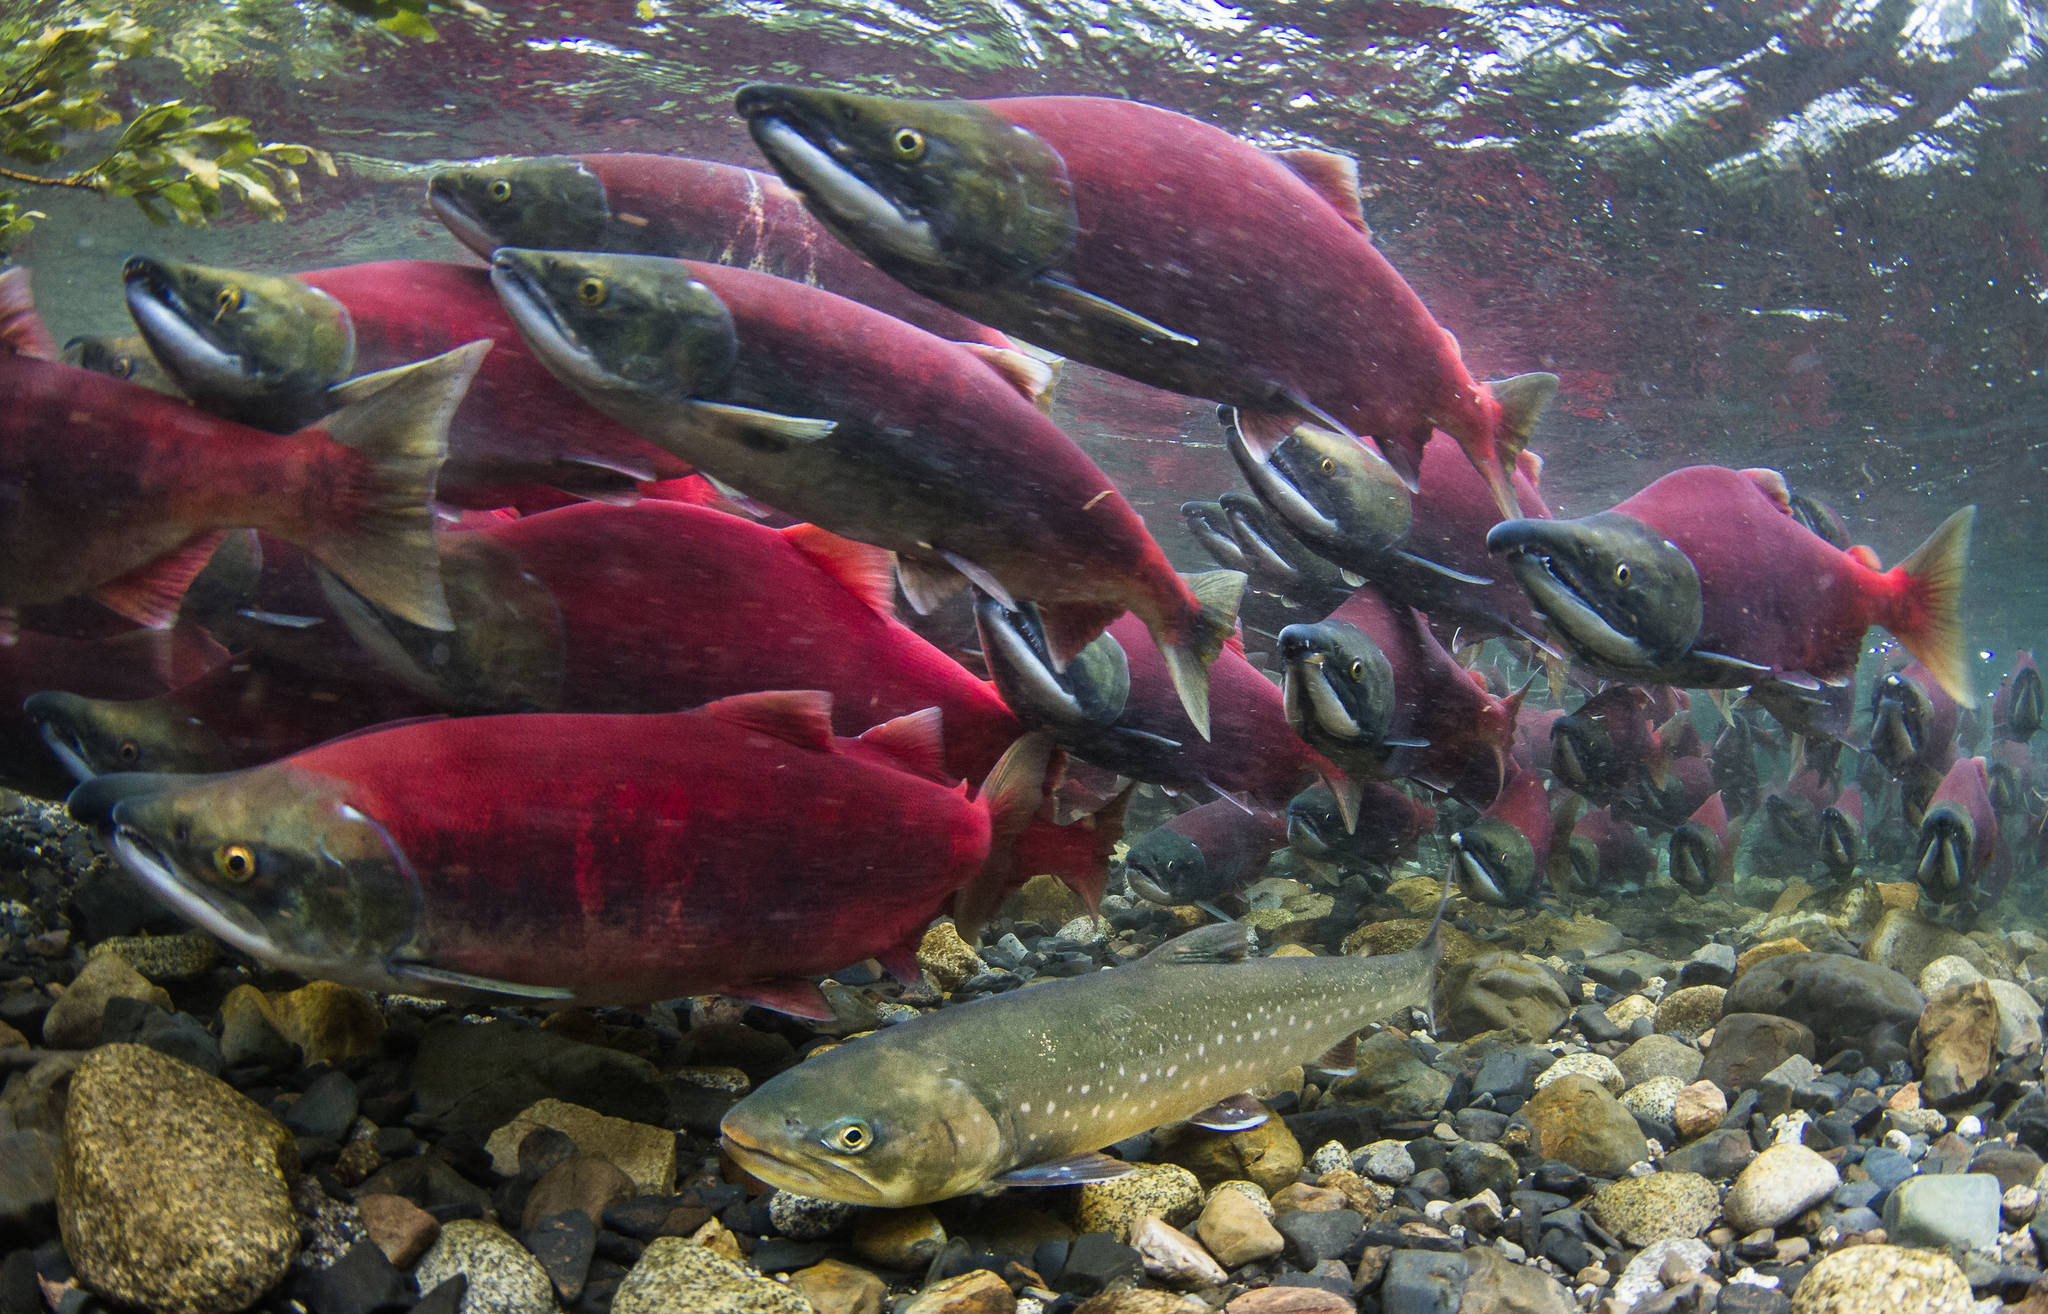 Sockeye salmon are pictured in this file photo. (File)